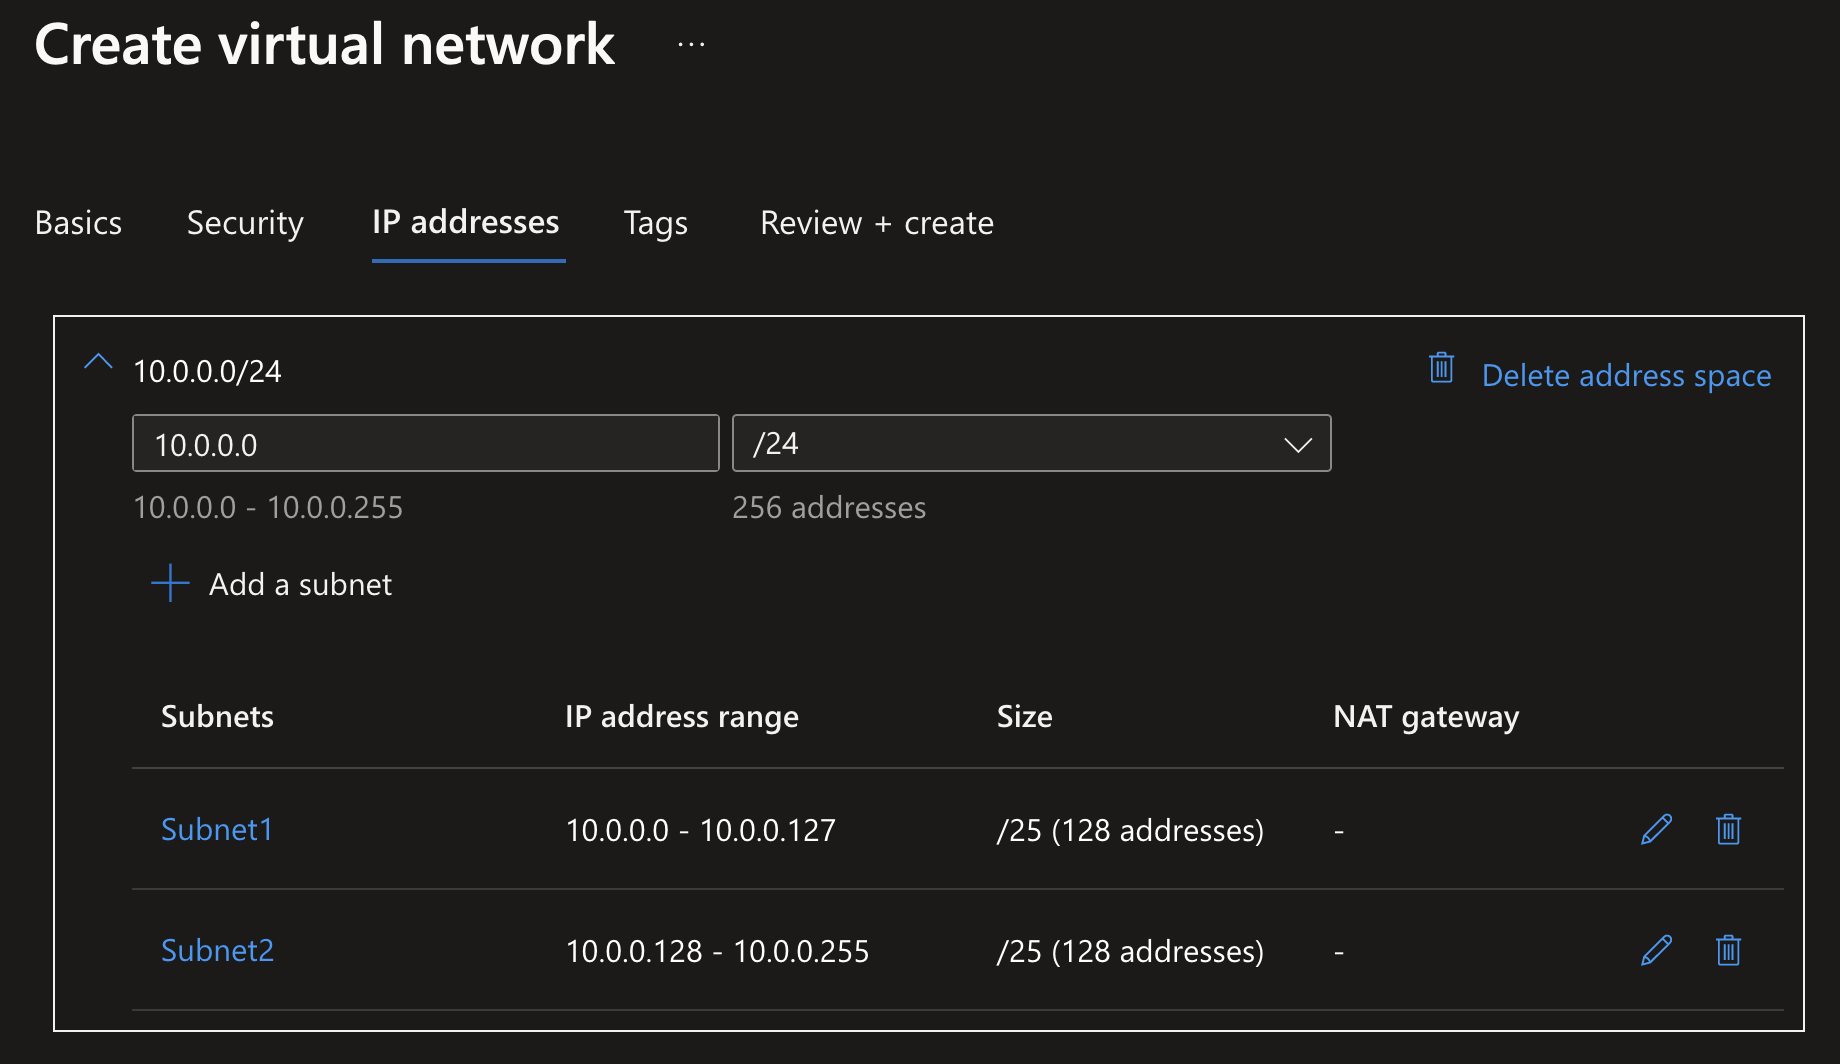 Screenshot showing Subnet1 and Subnet2 being created in Azure Portal.